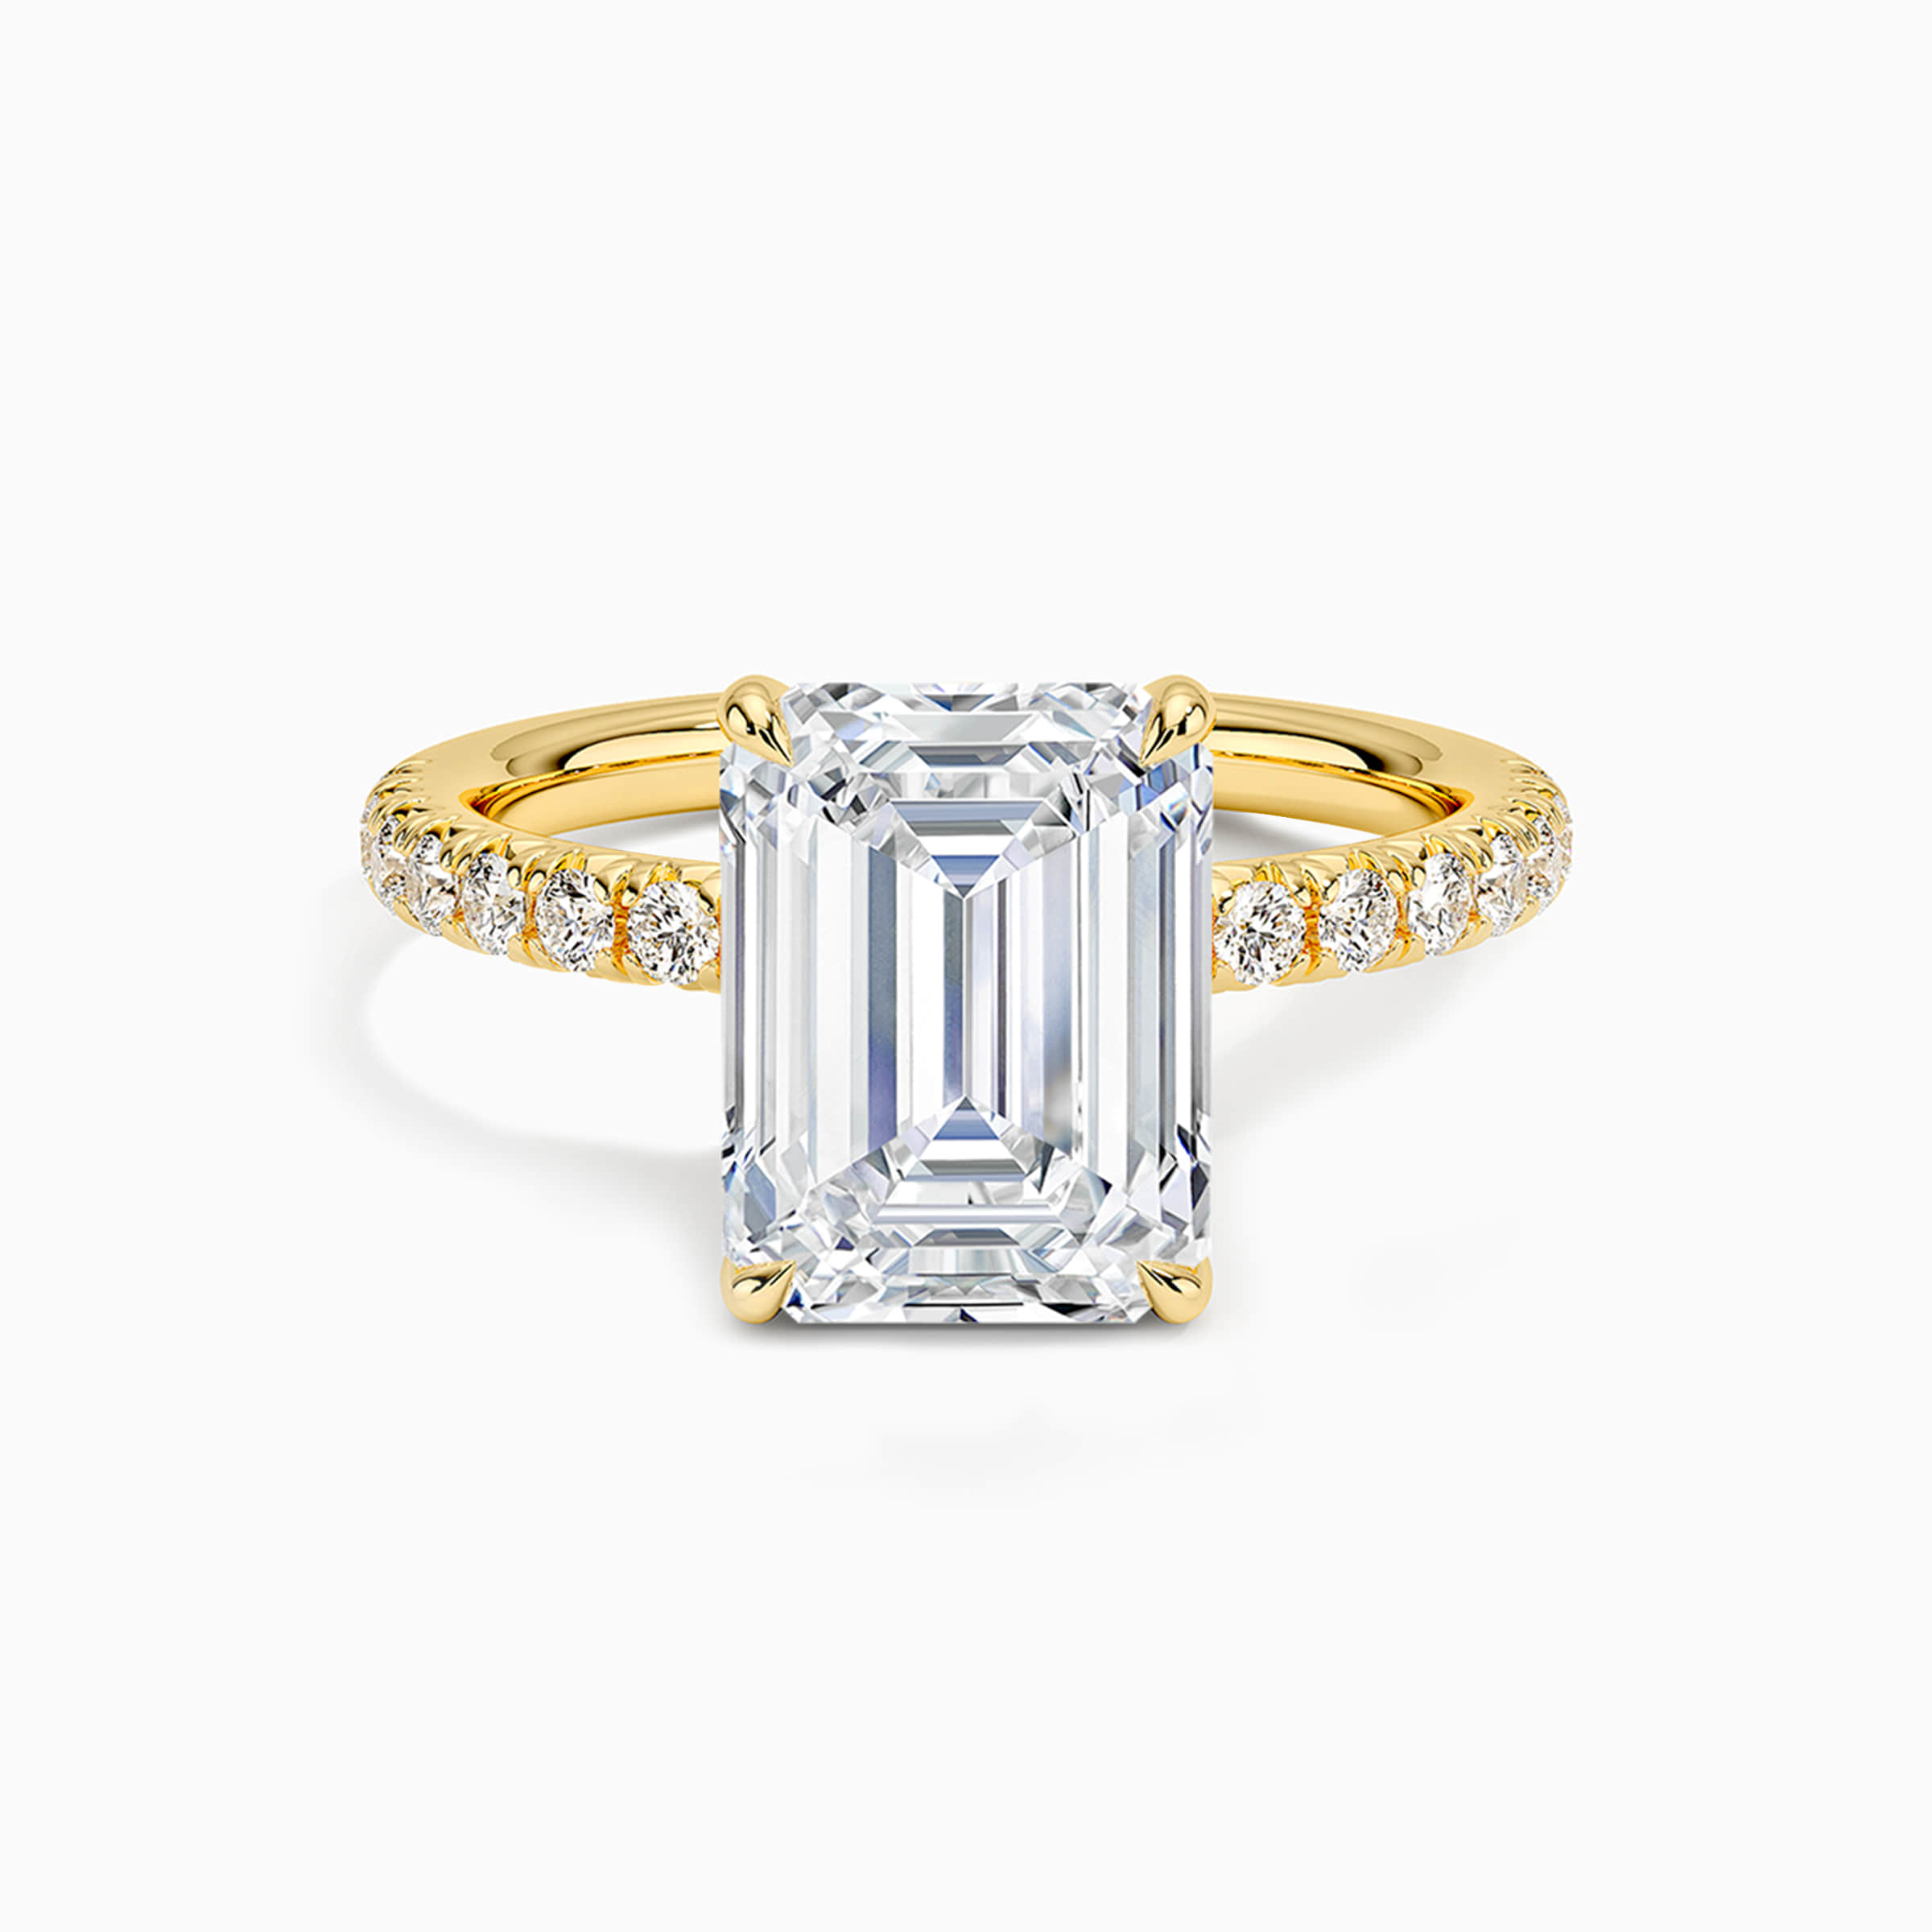 Darry Ring emerald cut promise ring